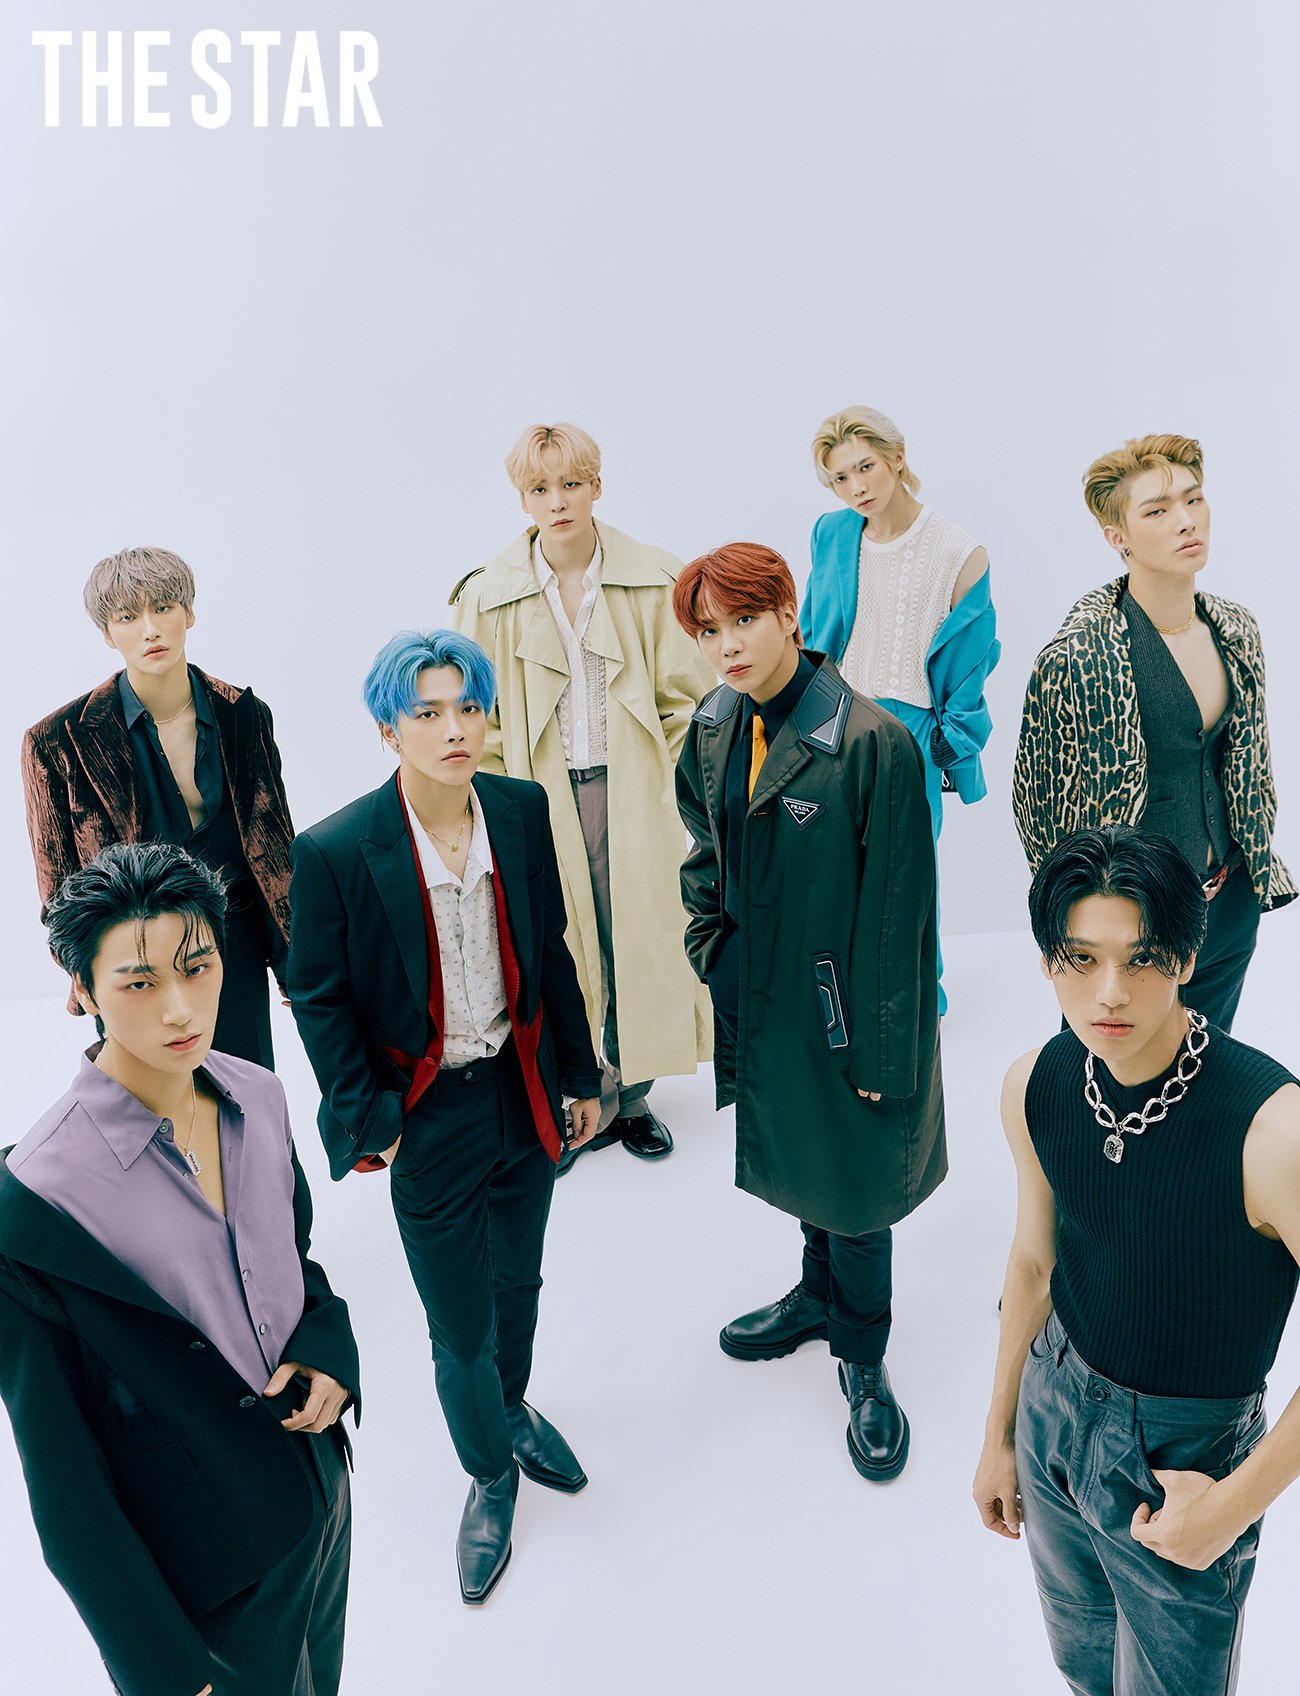 Today's most well-known musical acts include Ateez, The 1975, Ice Nine Kills, 5 Seconds of Summer, Knocked Loose, and Red Hot Chili Peppers